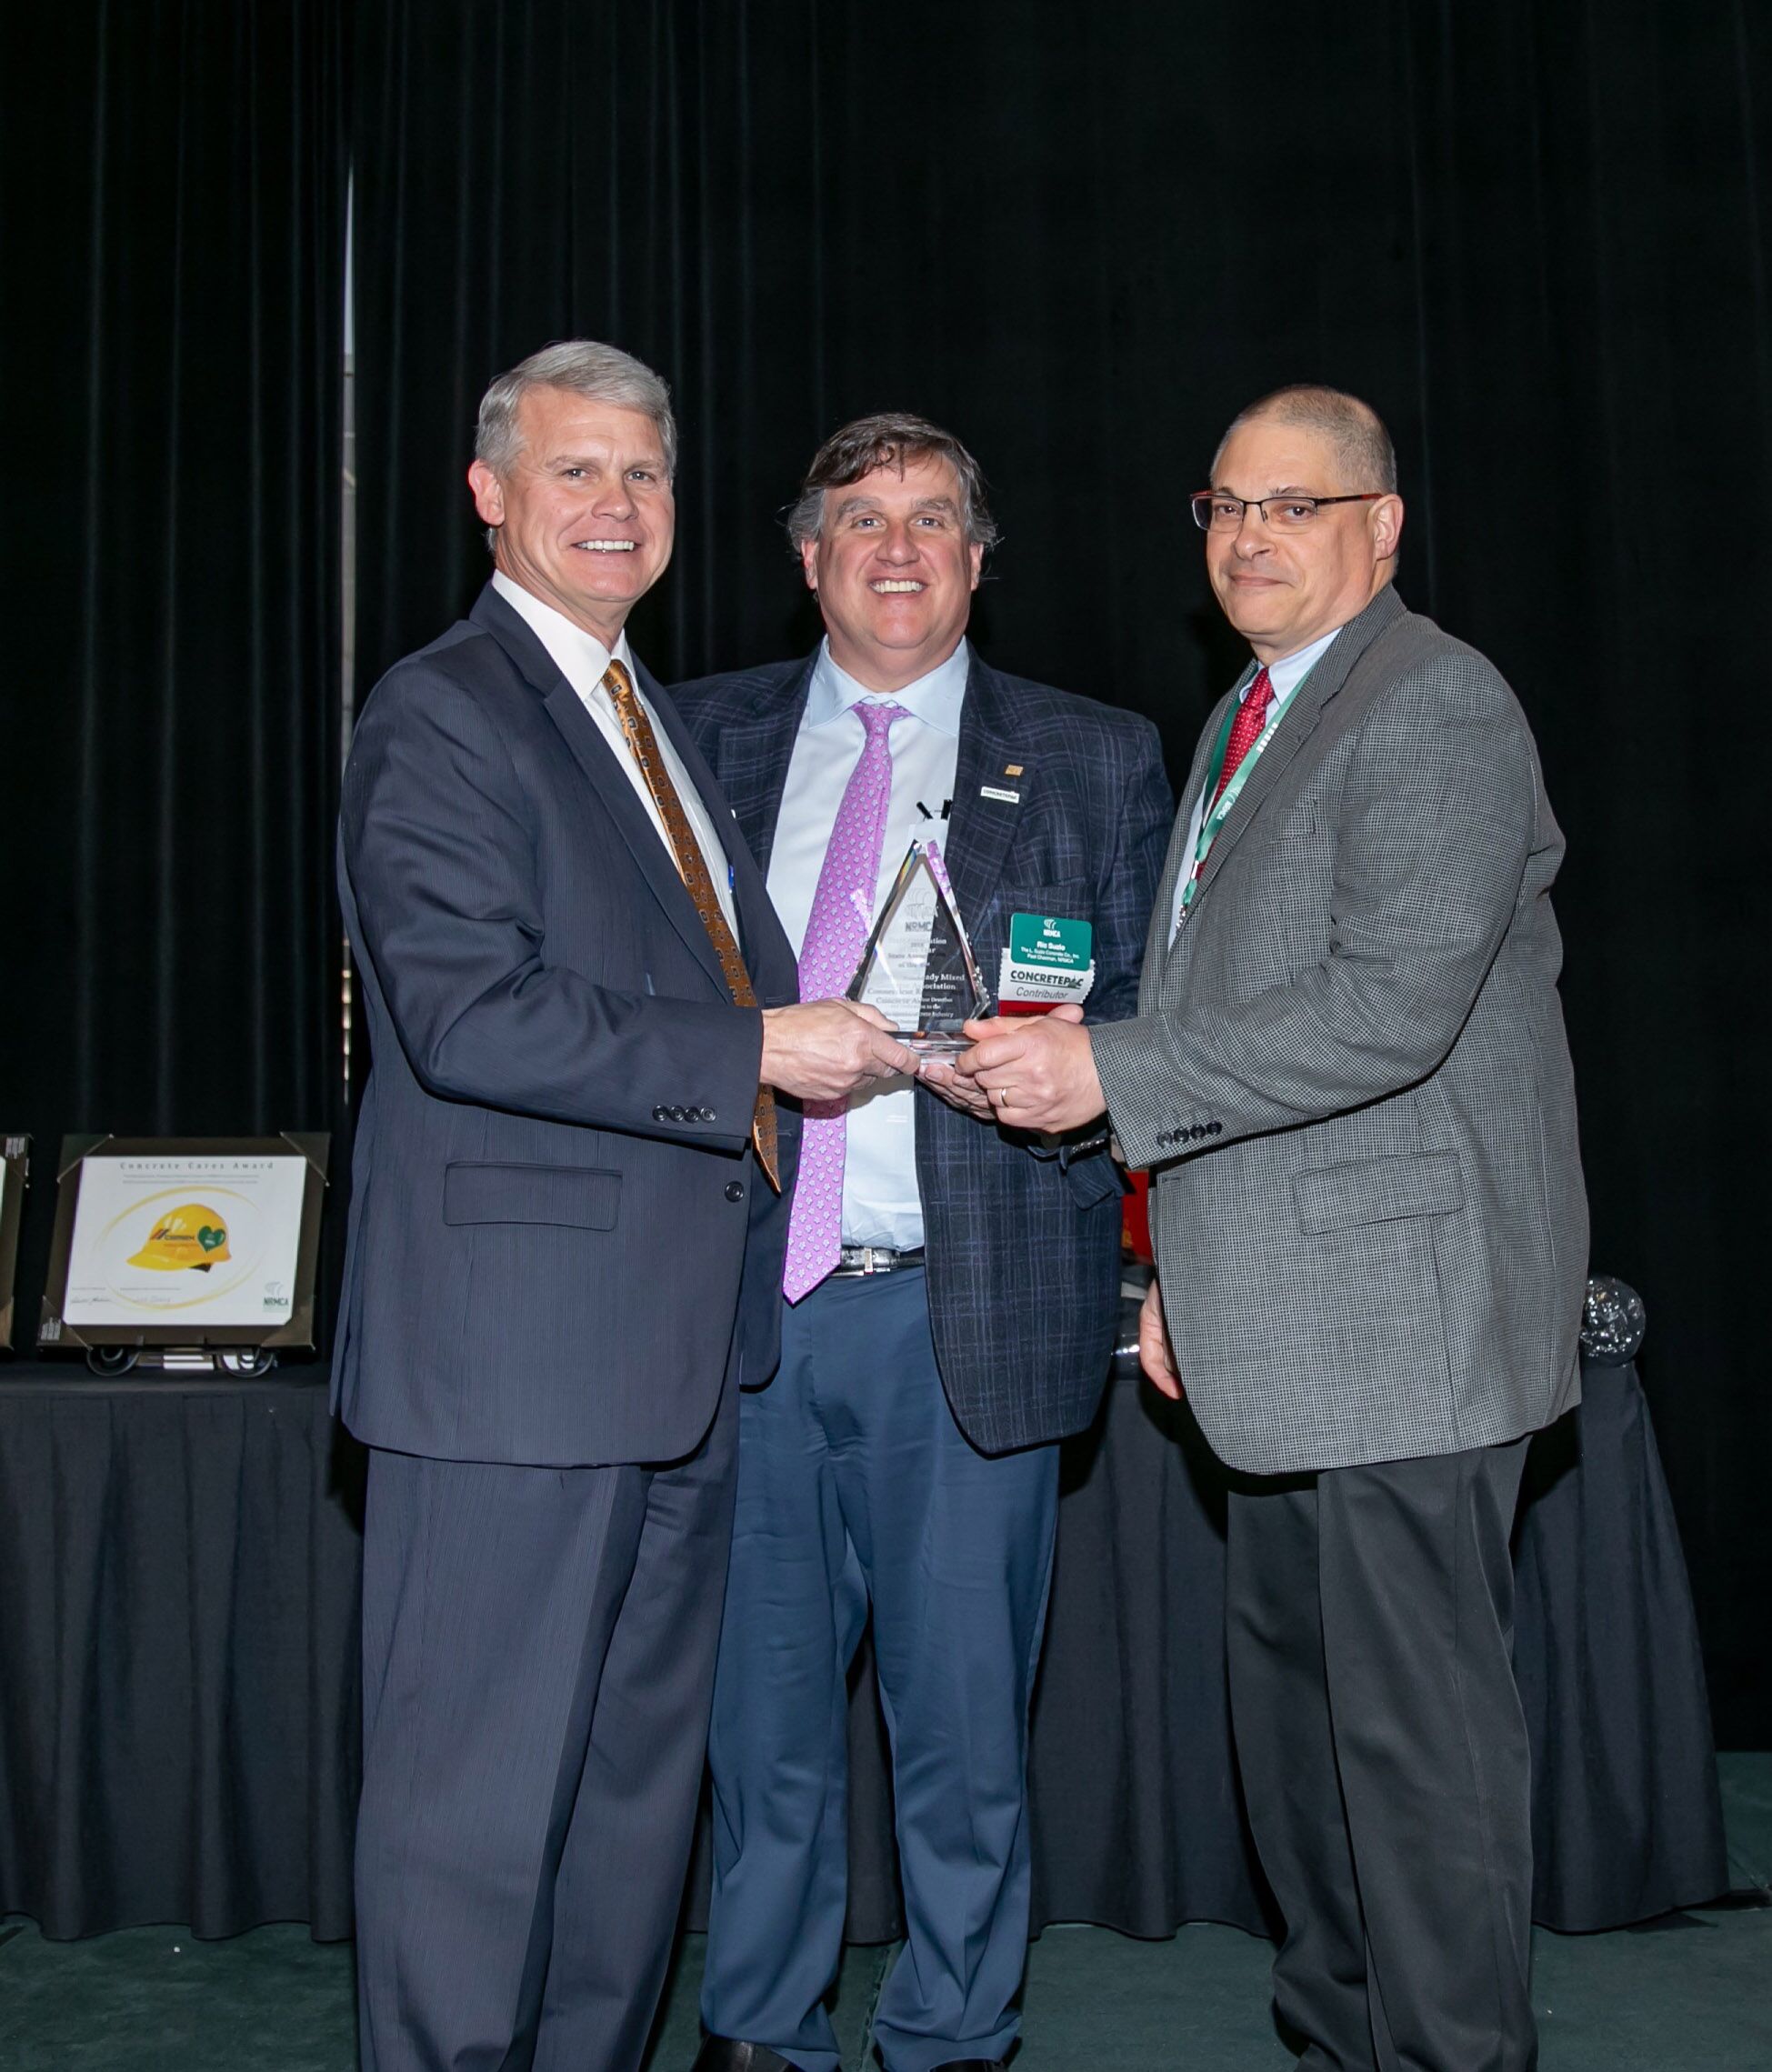 Left to Right: Rodney Grogan, past Chairman NRMCA; Ric Suzio, President, L. Suzio Concrete Company; Dominic Di Cenzo, Executive Director, Connecticut Concrete Promotion Council with the 2018 NRMCA State Affiliate of the Year Award for the Connecticut Ready Mixed Concrete Association.